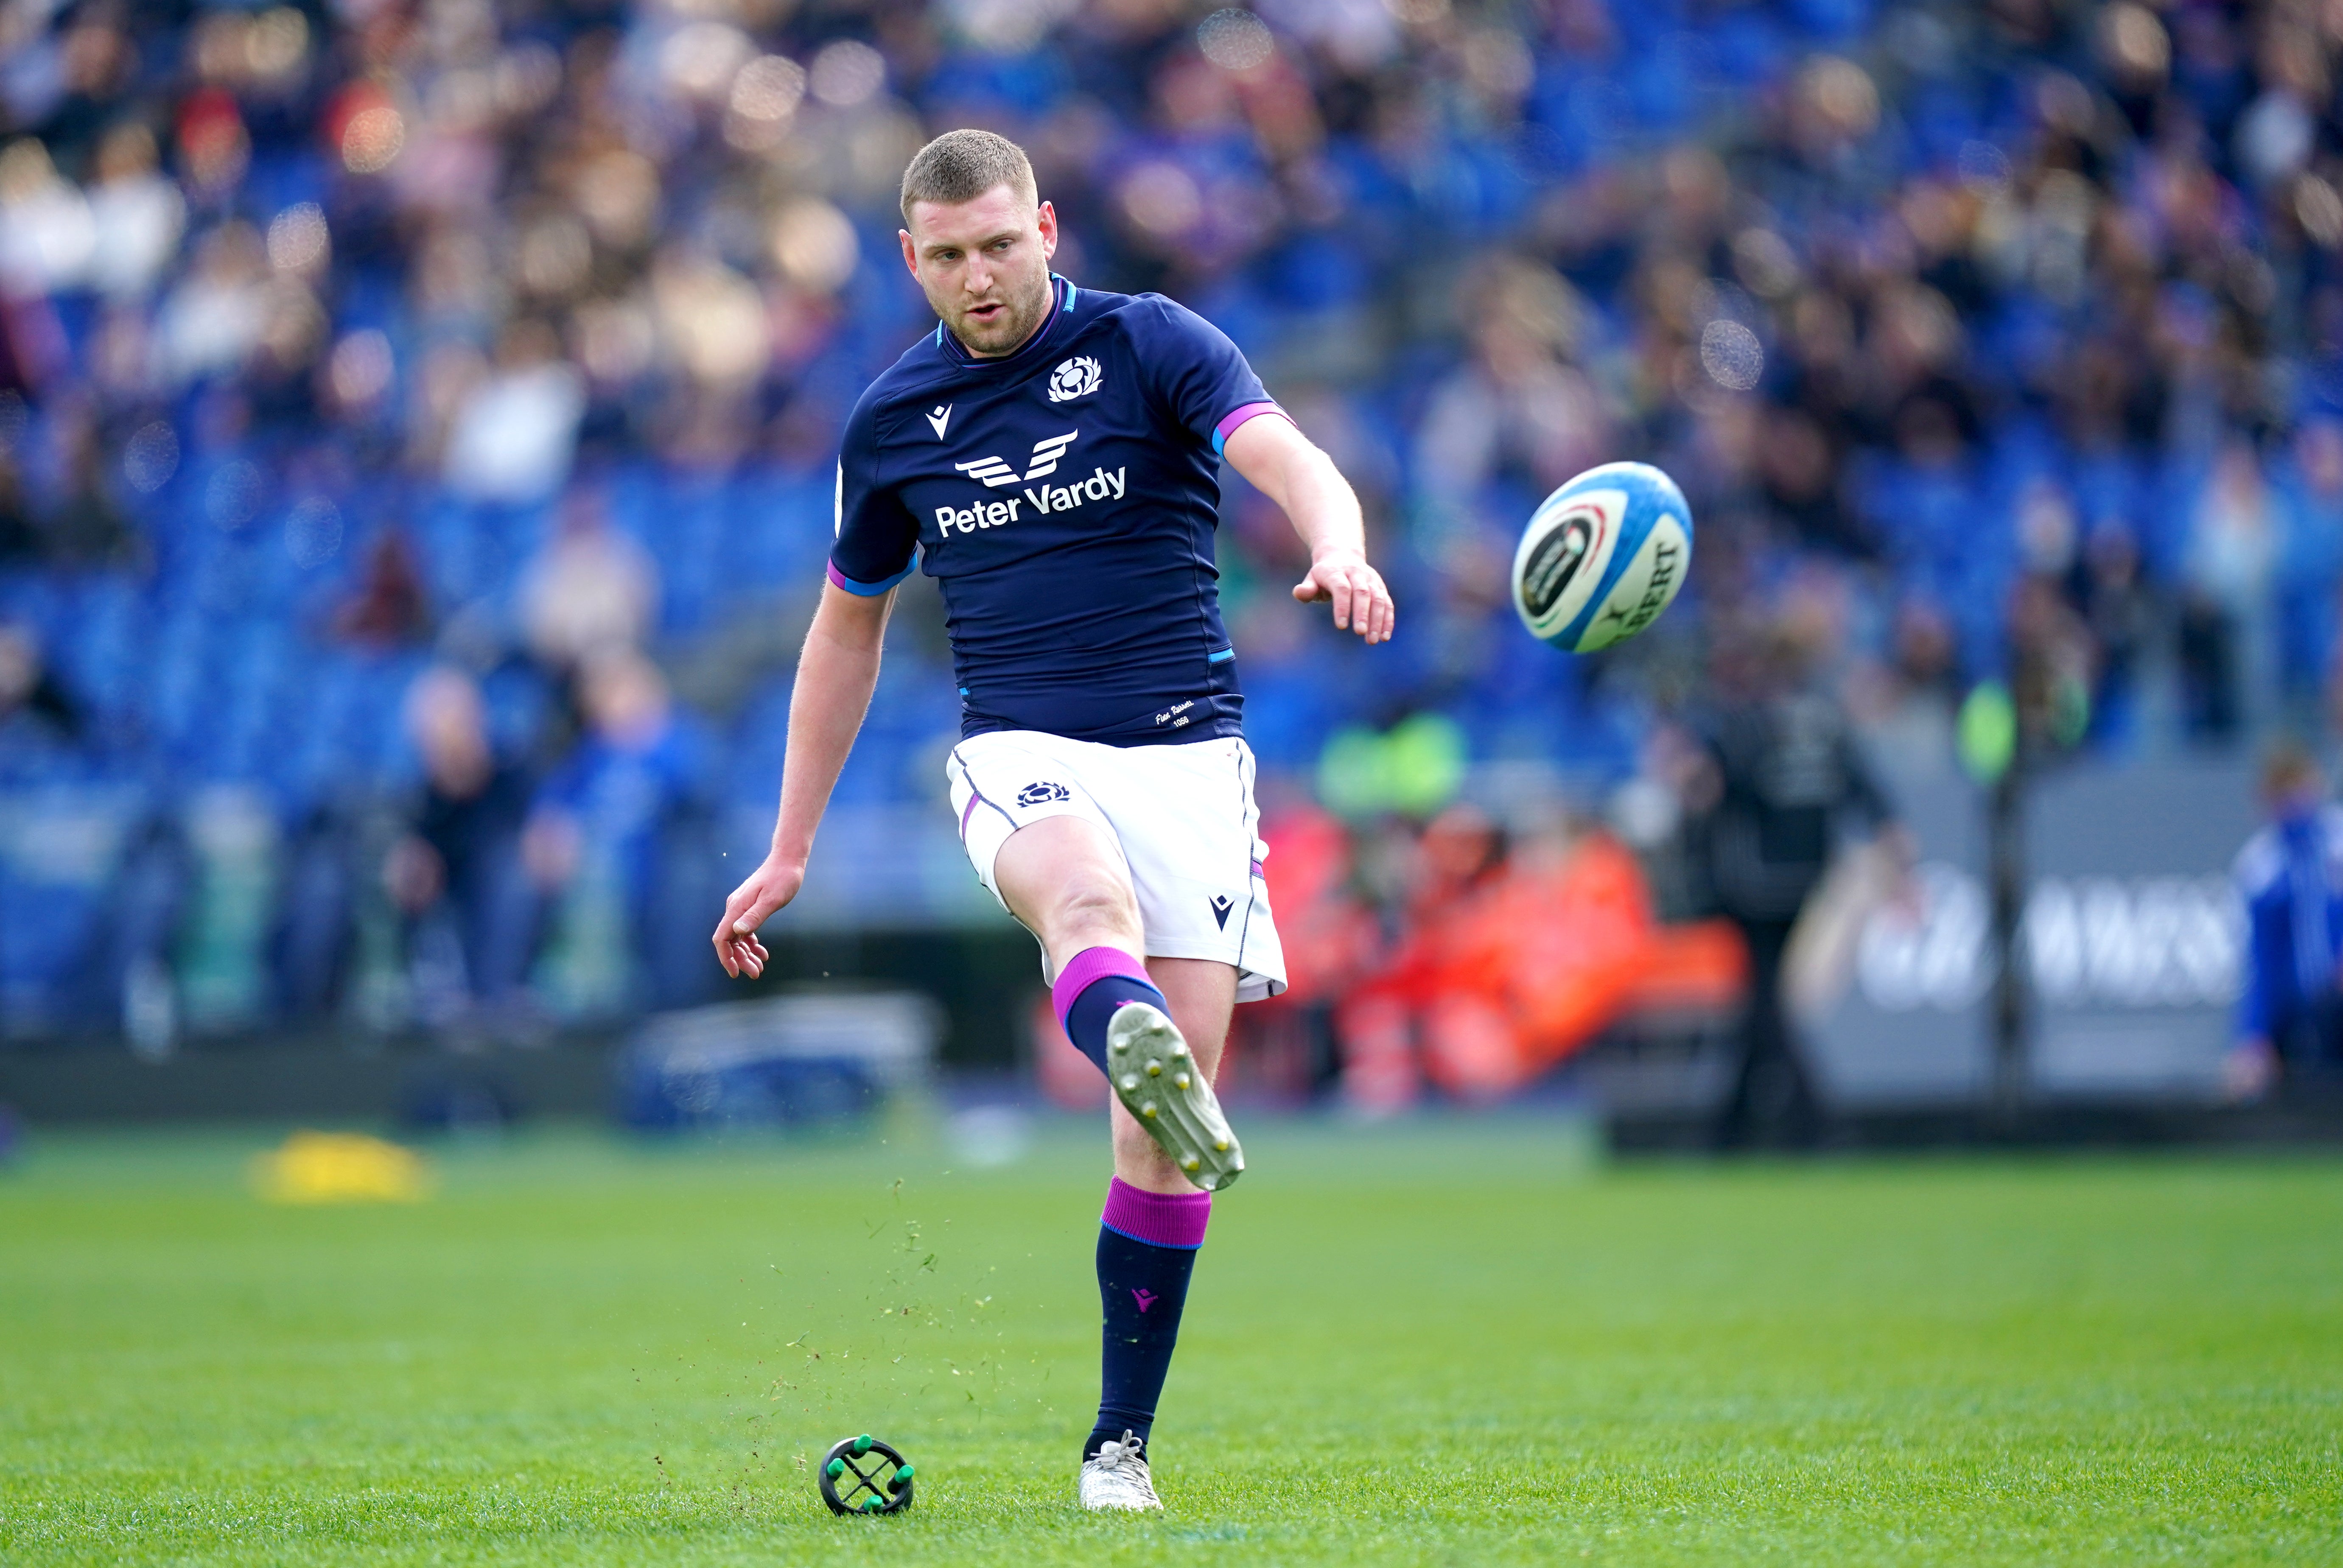 Scotland fly-half Finn Russell is part of a formidable Racing 92 line-up (Mike Egerton/PA)